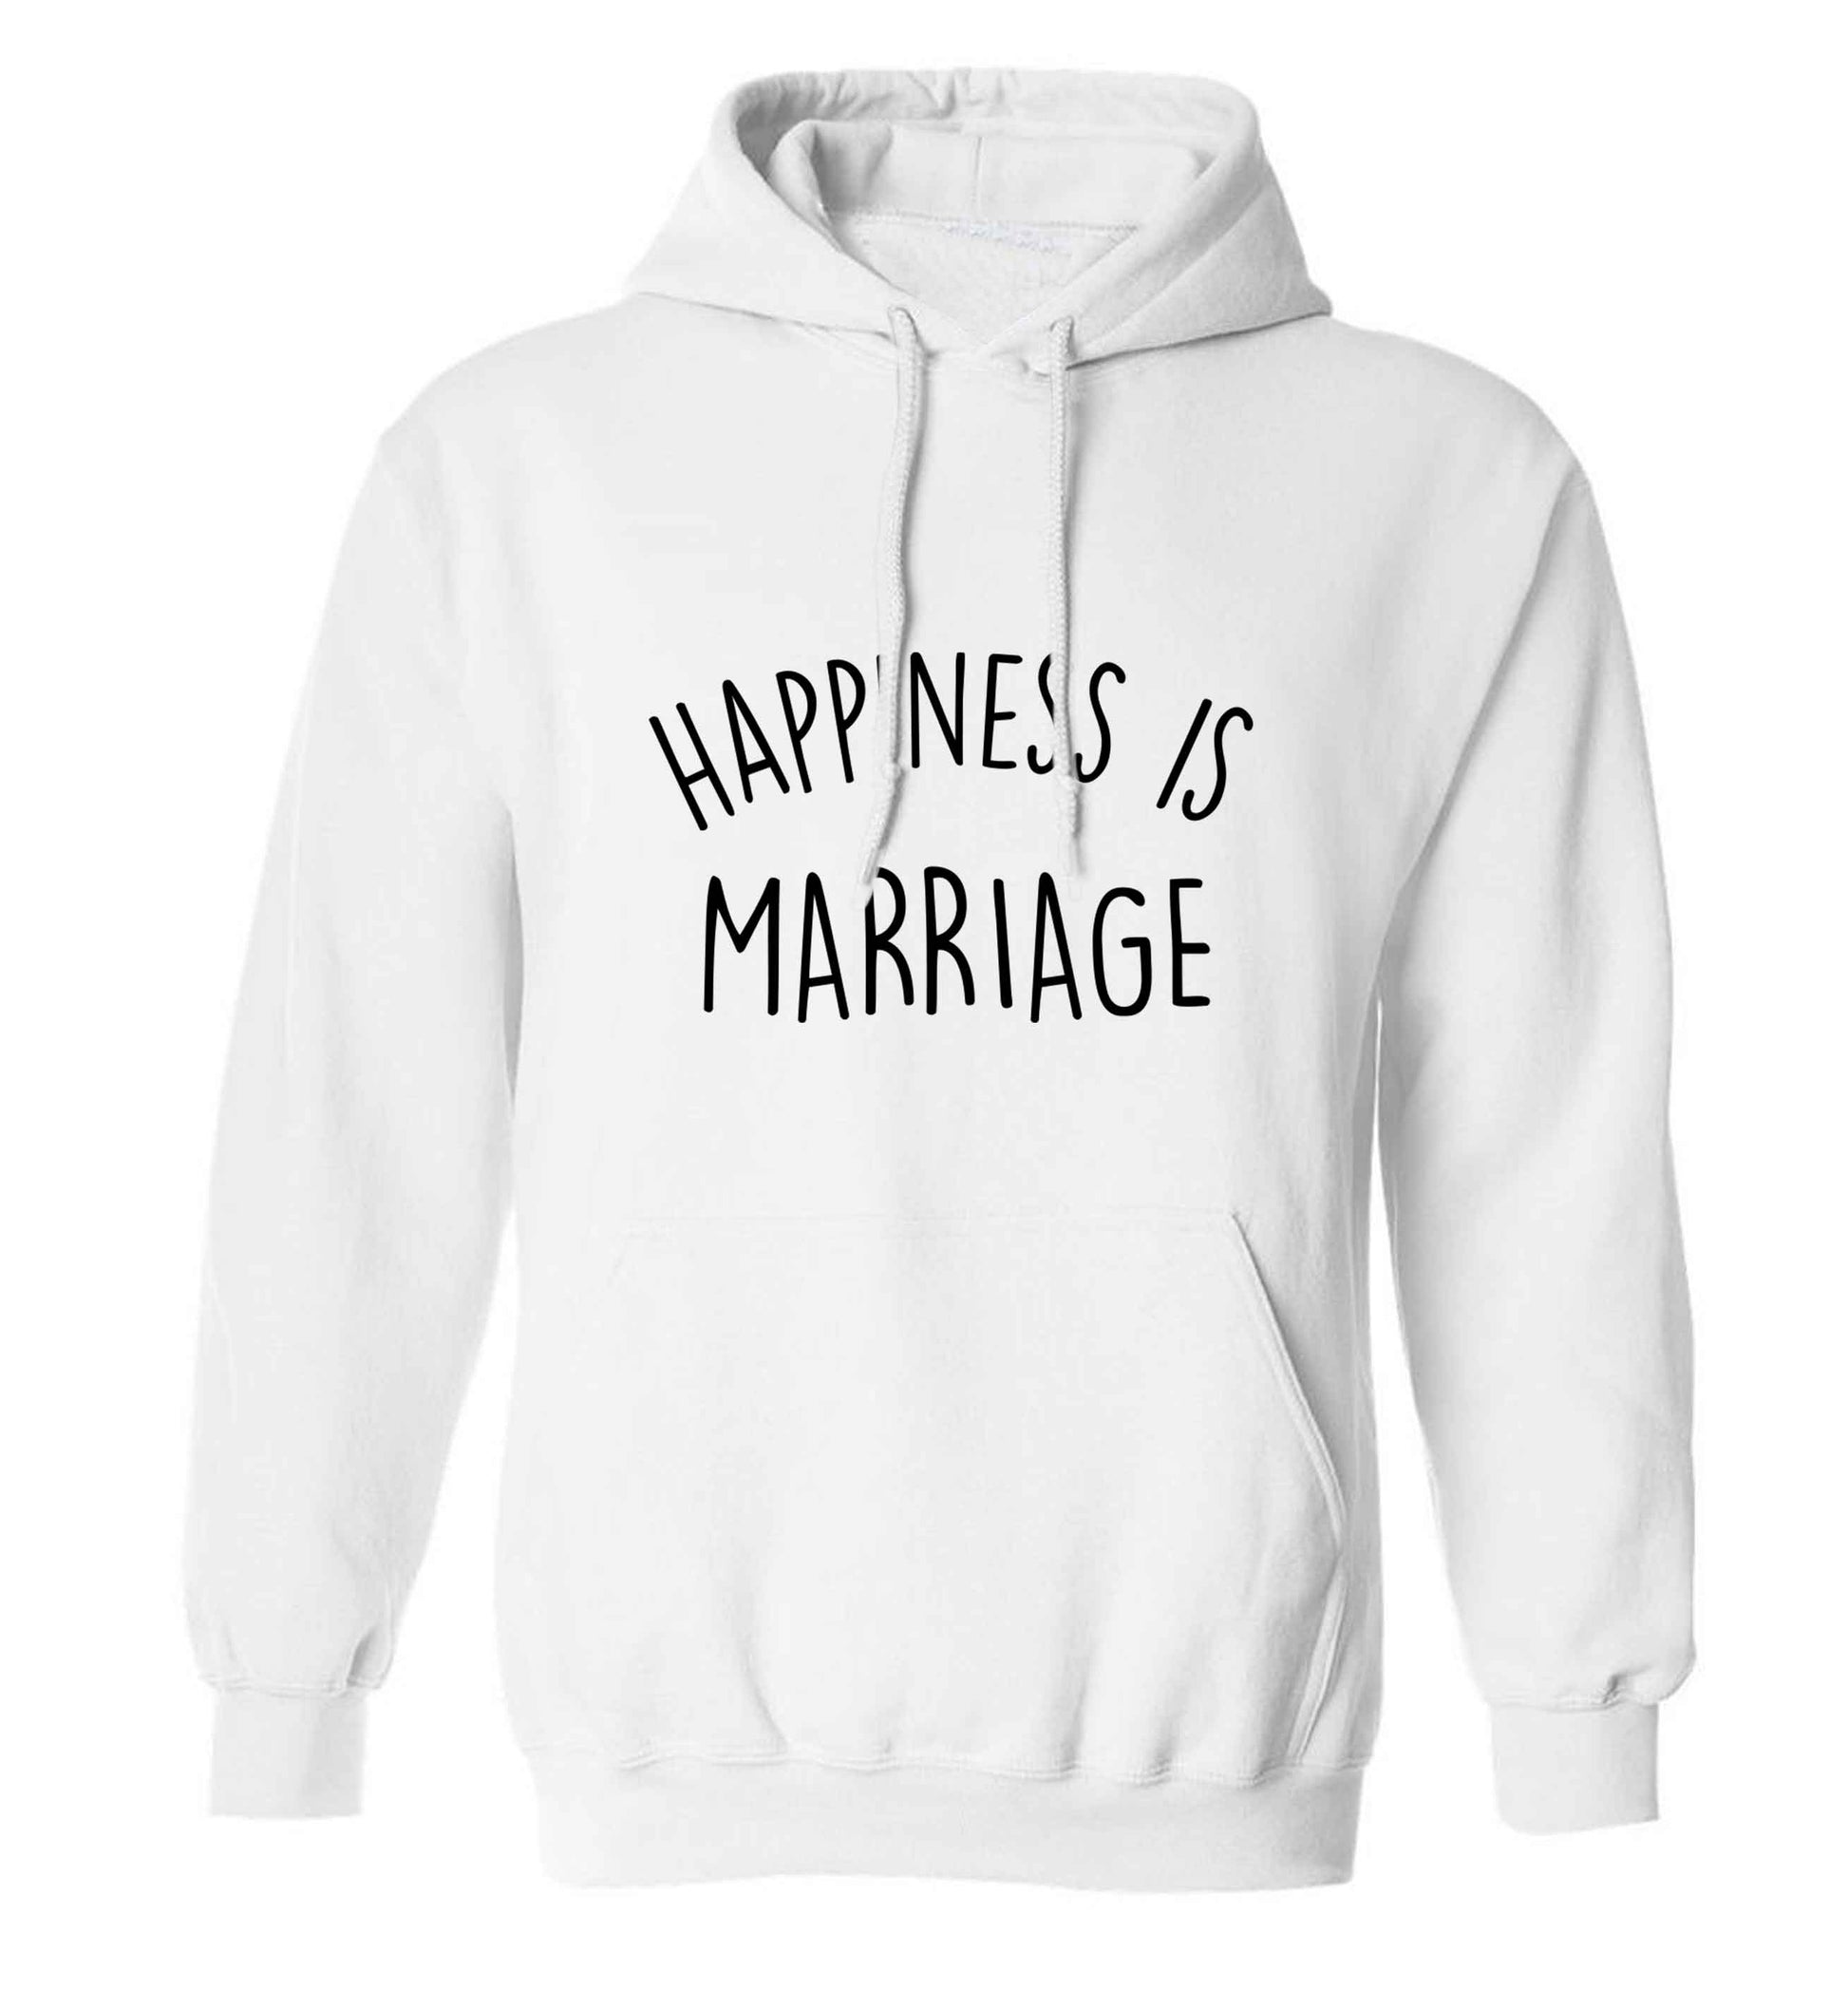 Happiness is marriage adults unisex white hoodie 2XL